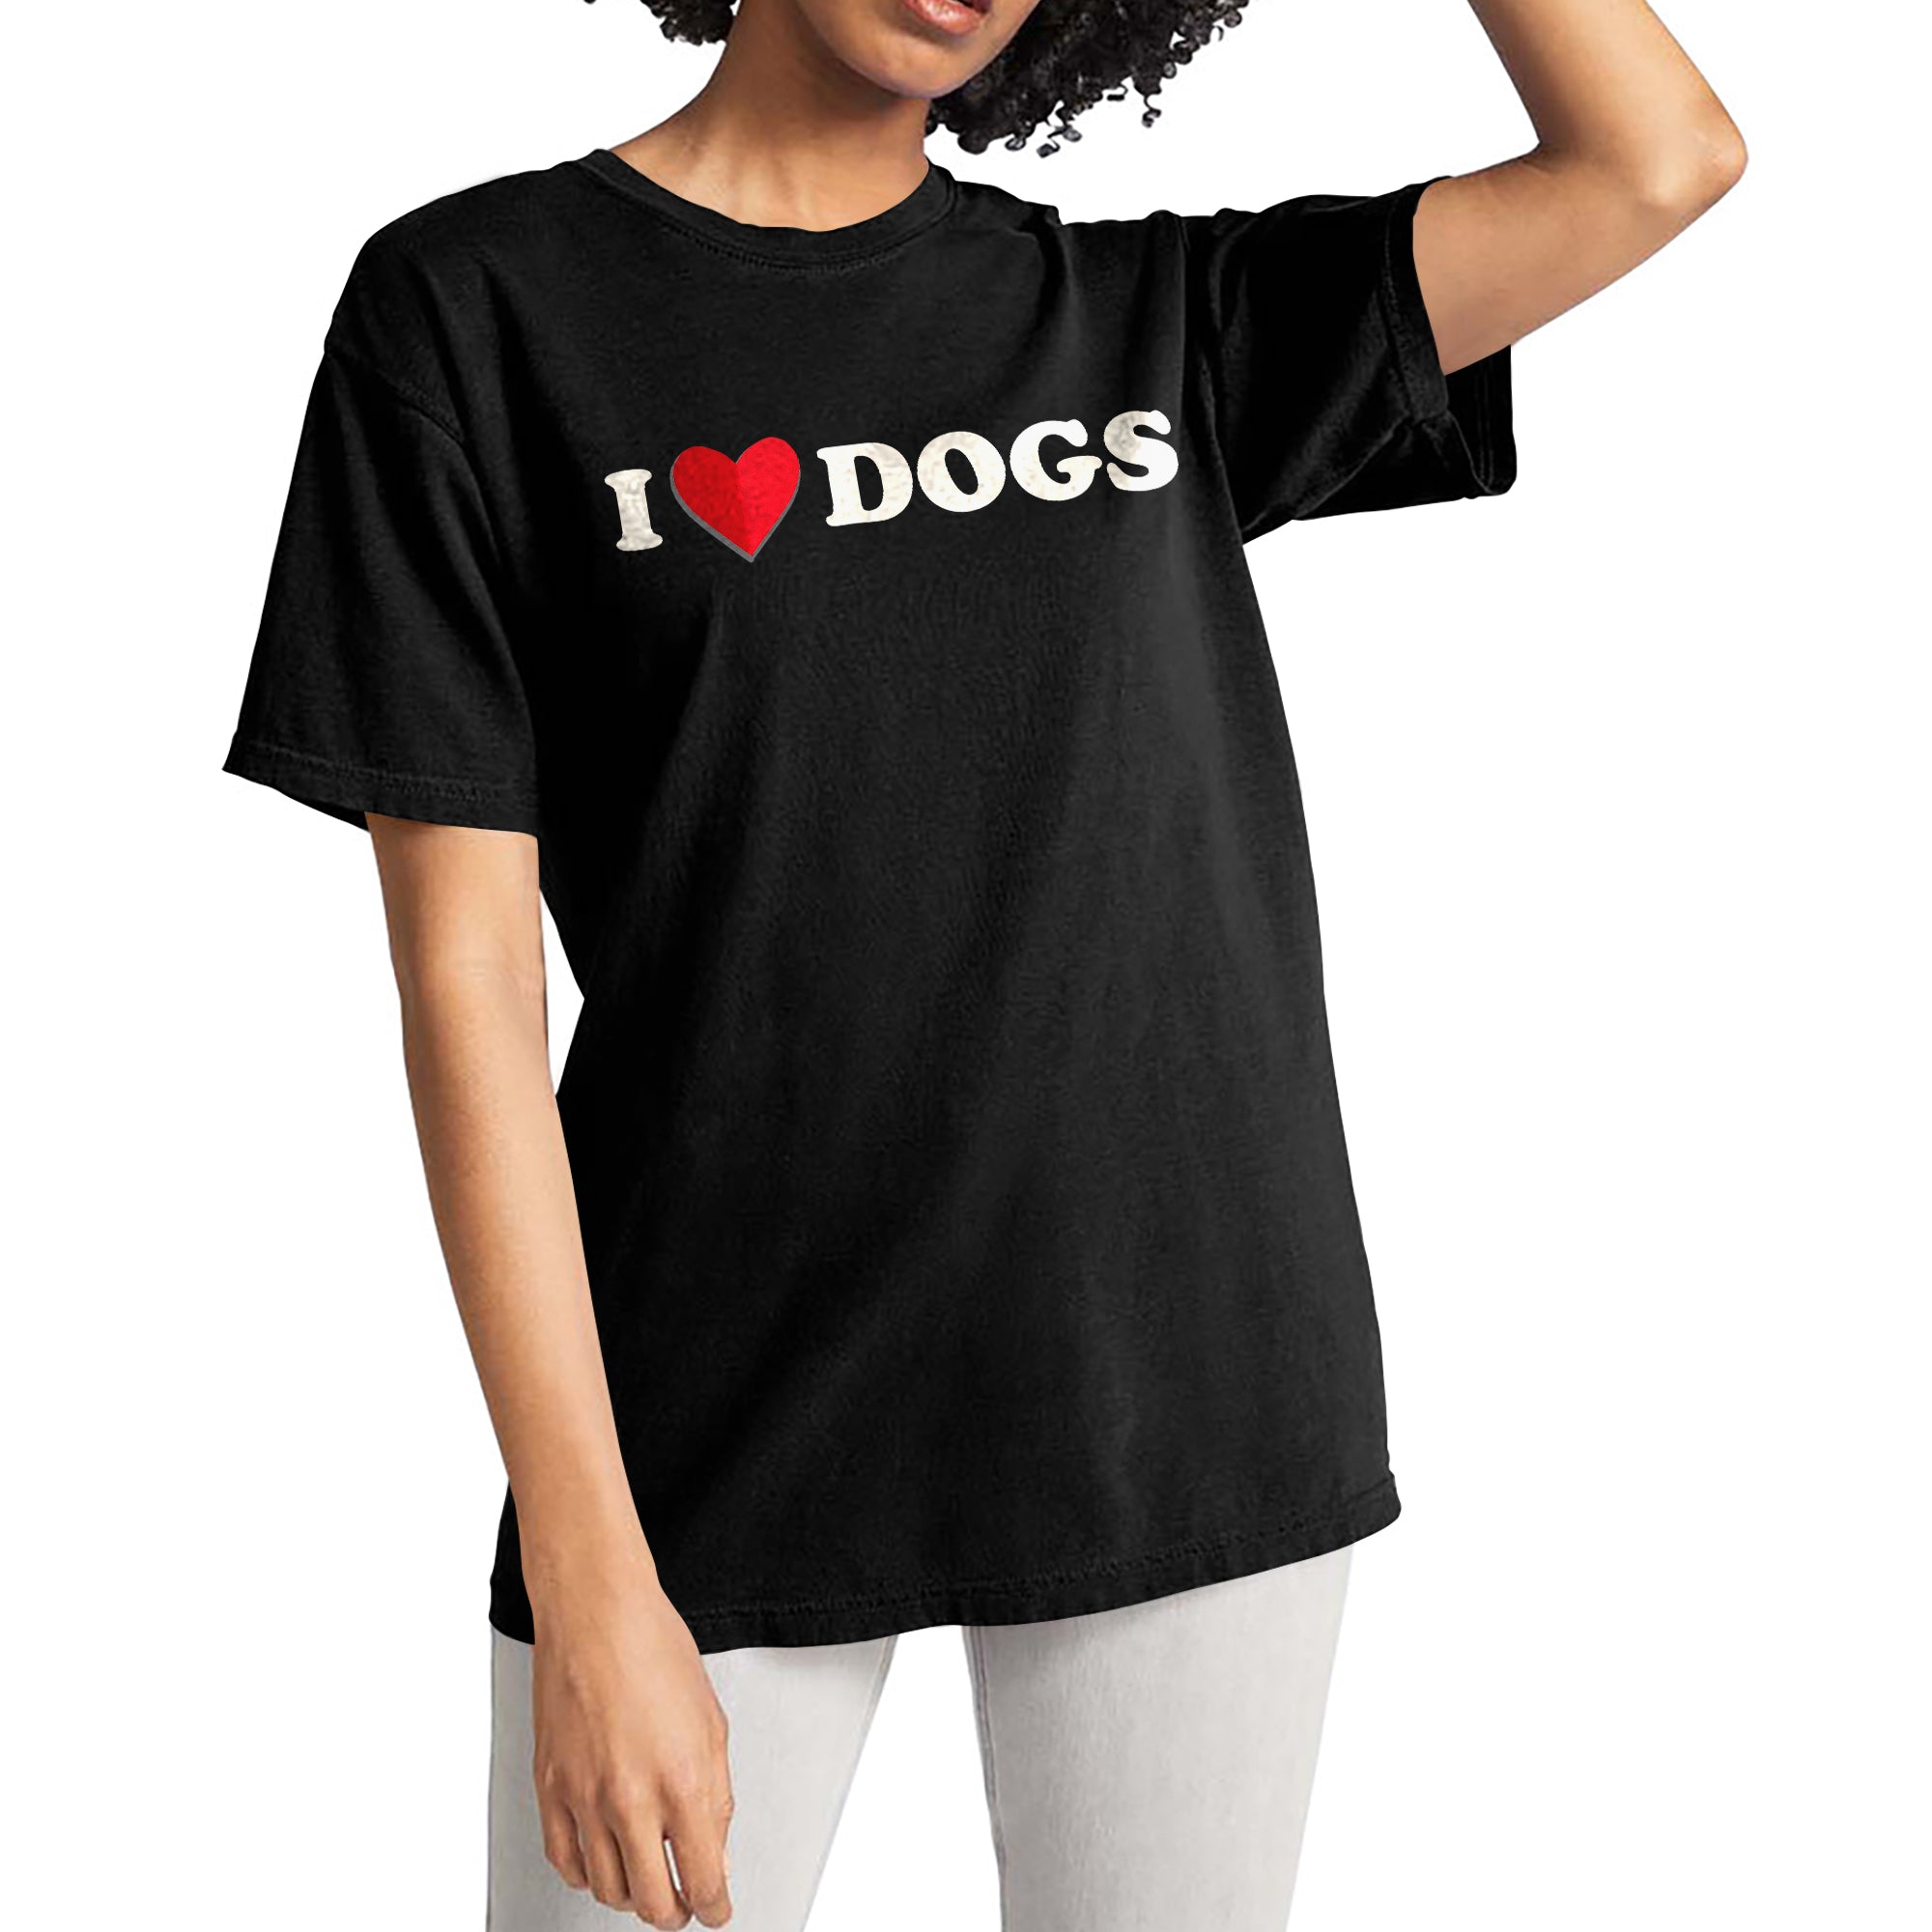 I Heart Dogs Garment-Dyed Tee - Stories You Can Wear